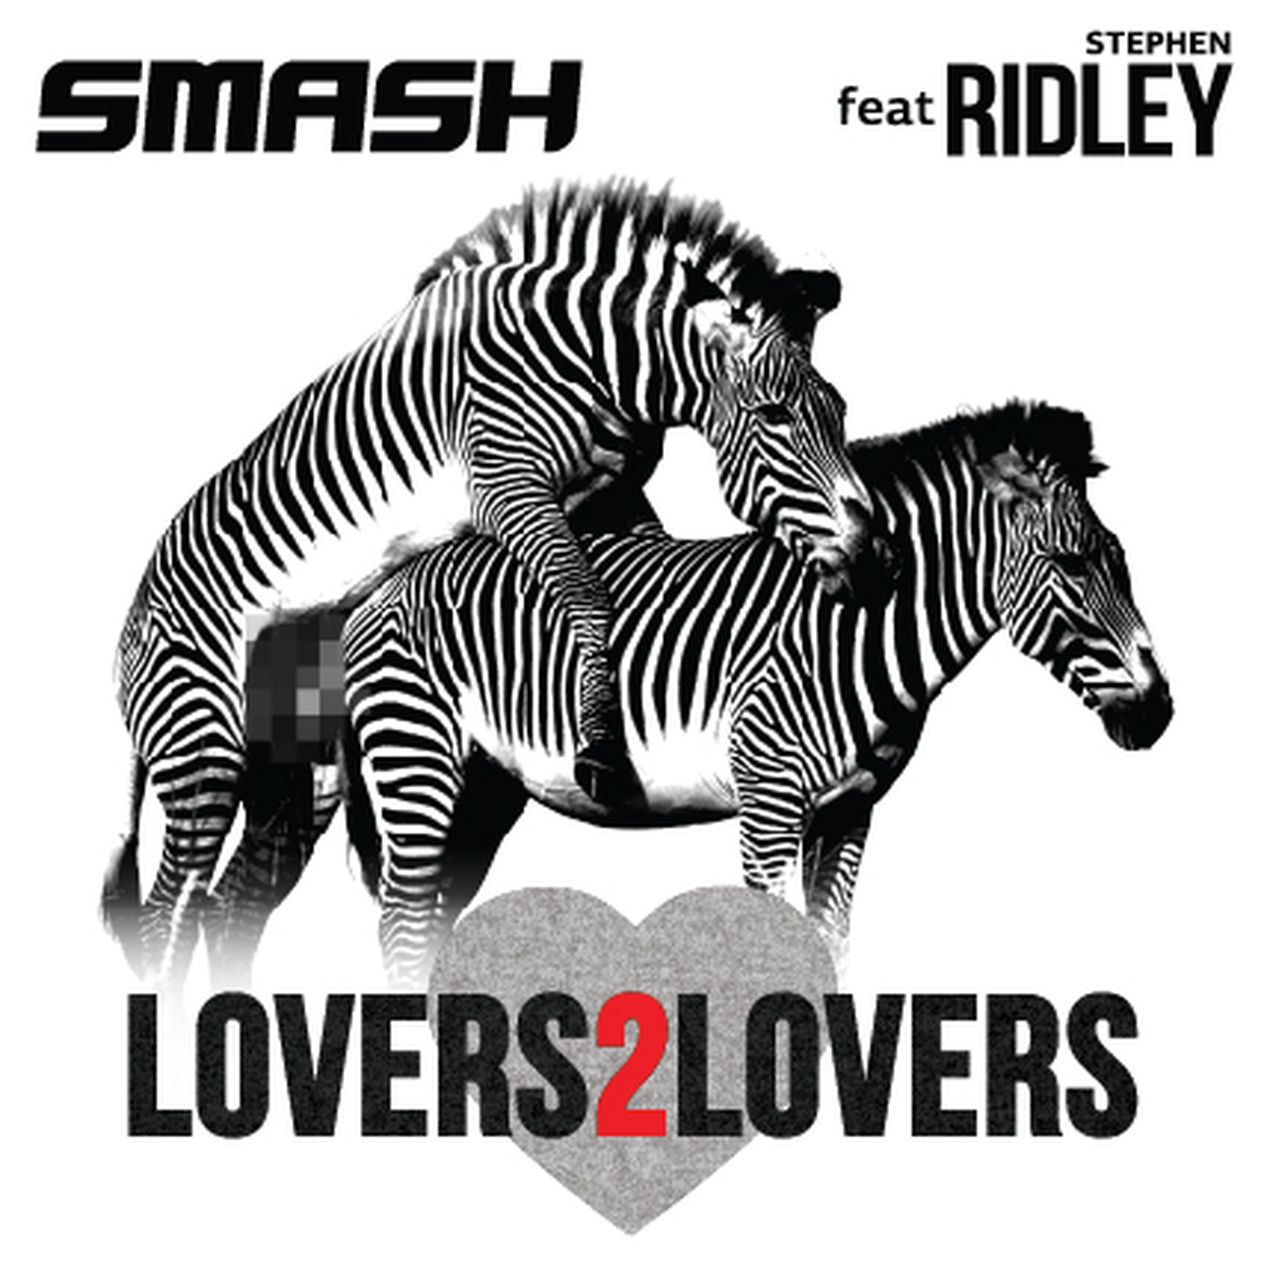 We love two. DJ Smash lovers2lovers feat Ridley. Smash lovers 2 lovers. Lovers to lovers. DJ Smash Love.